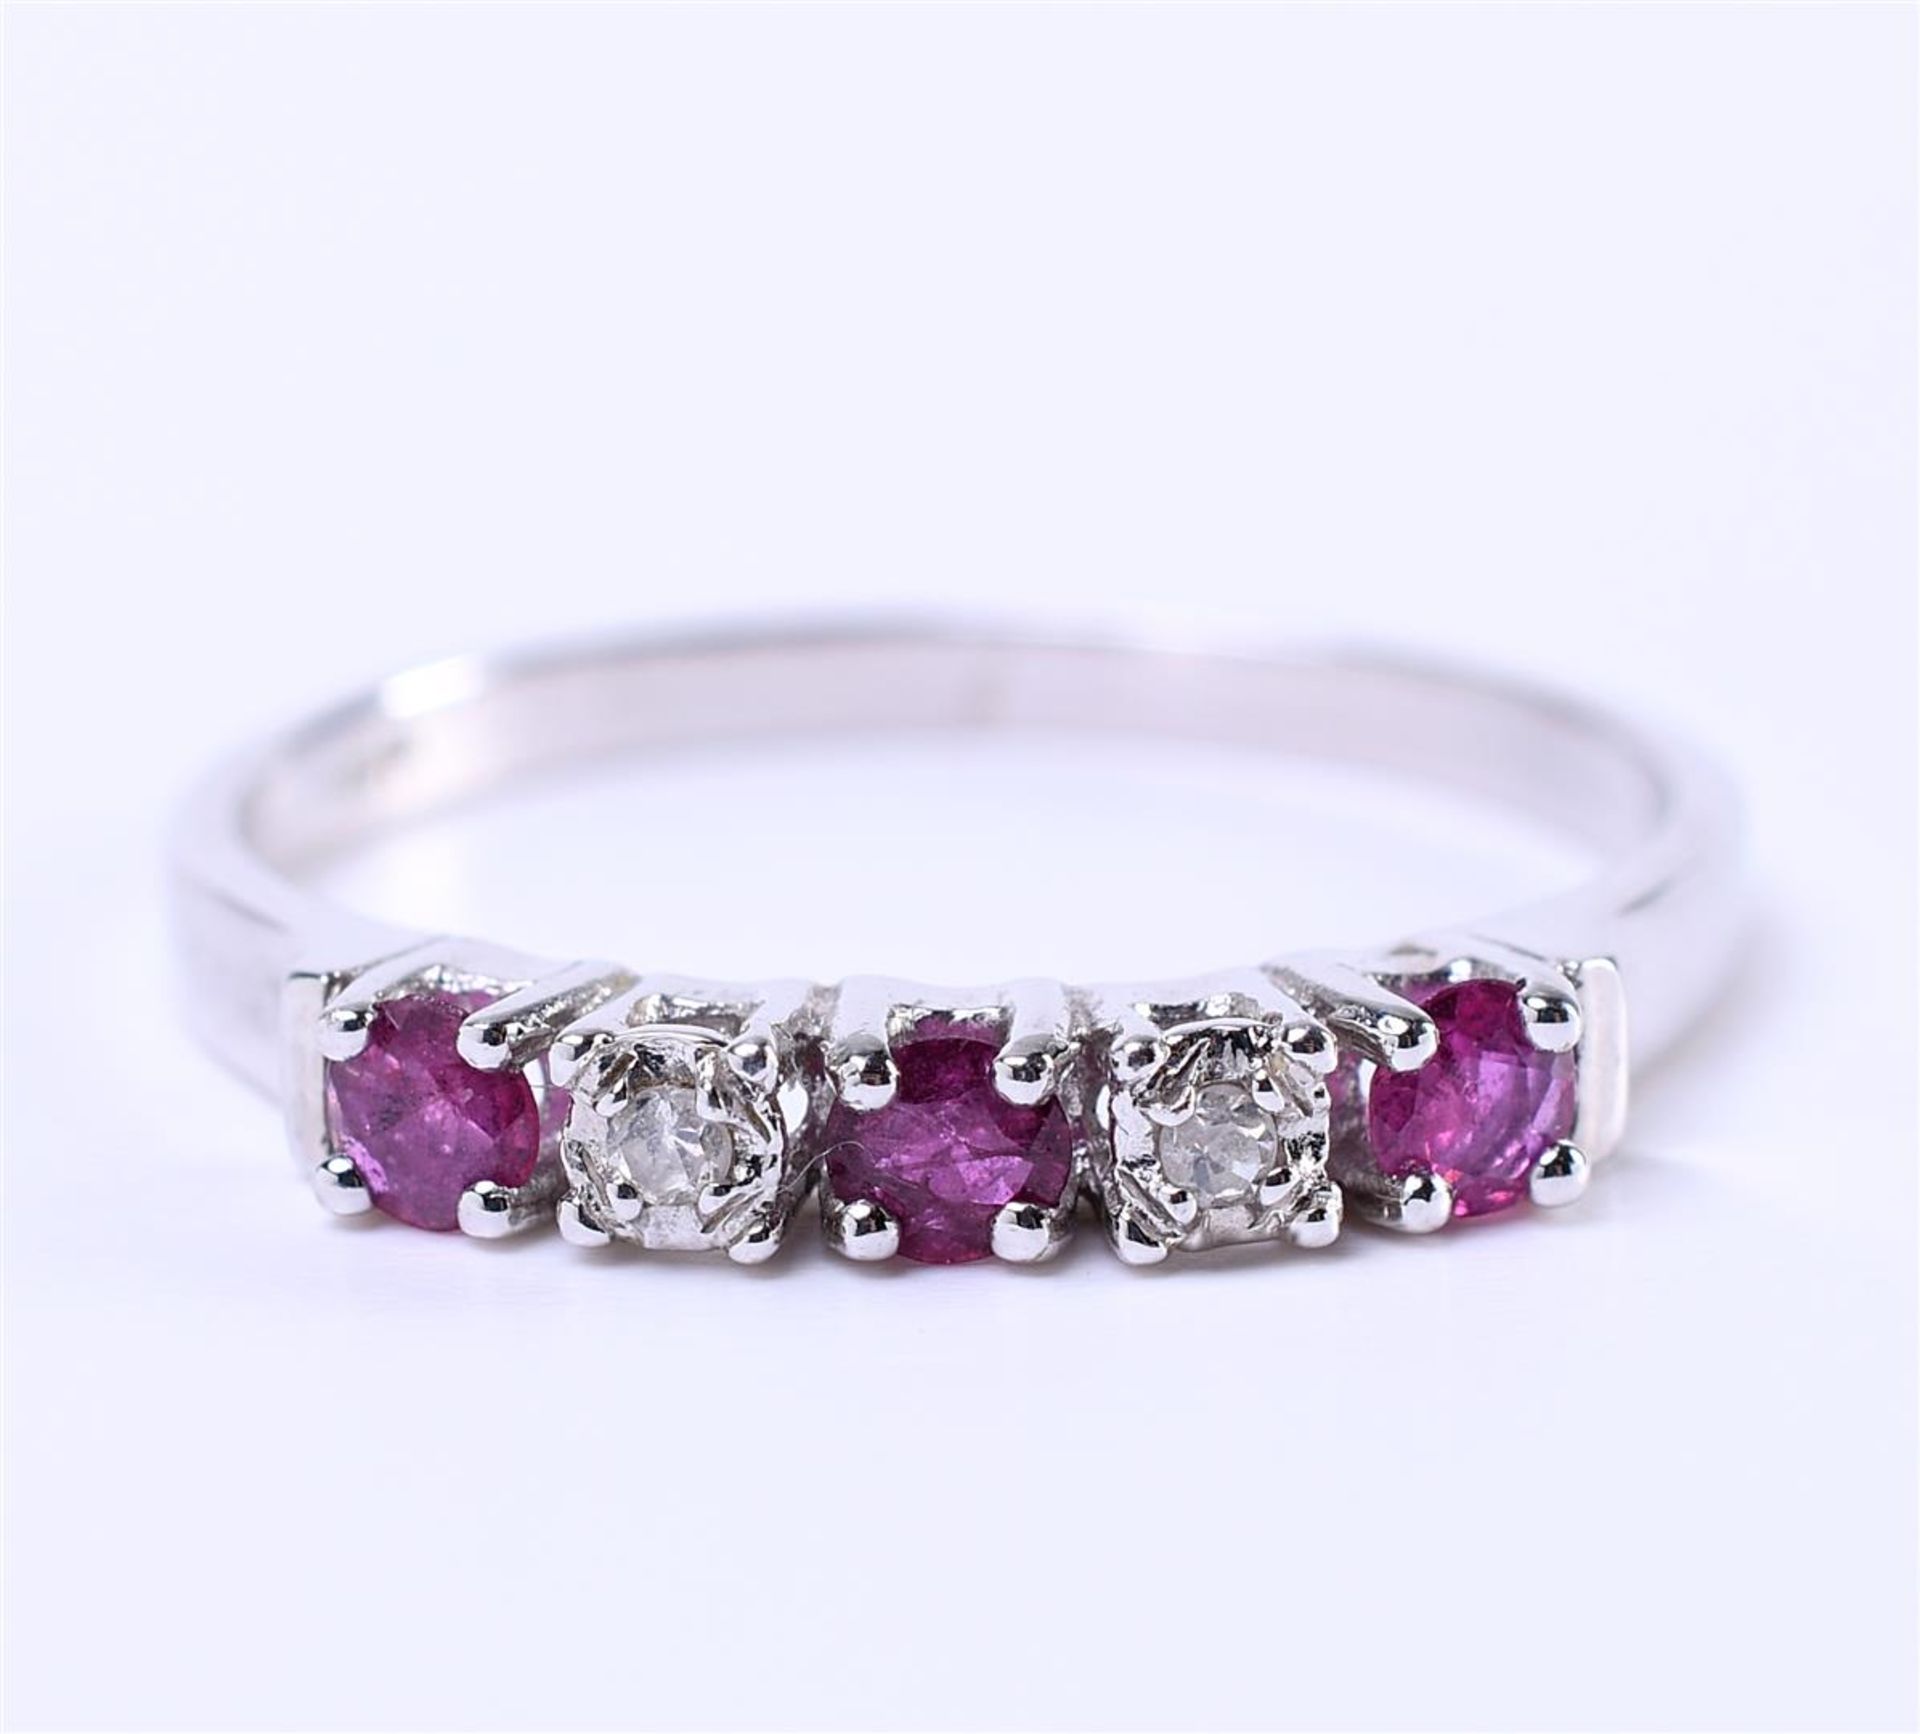 14kt white gold row ring set with ruby and diamond. Of which 2 single cut diamonds - Image 4 of 6